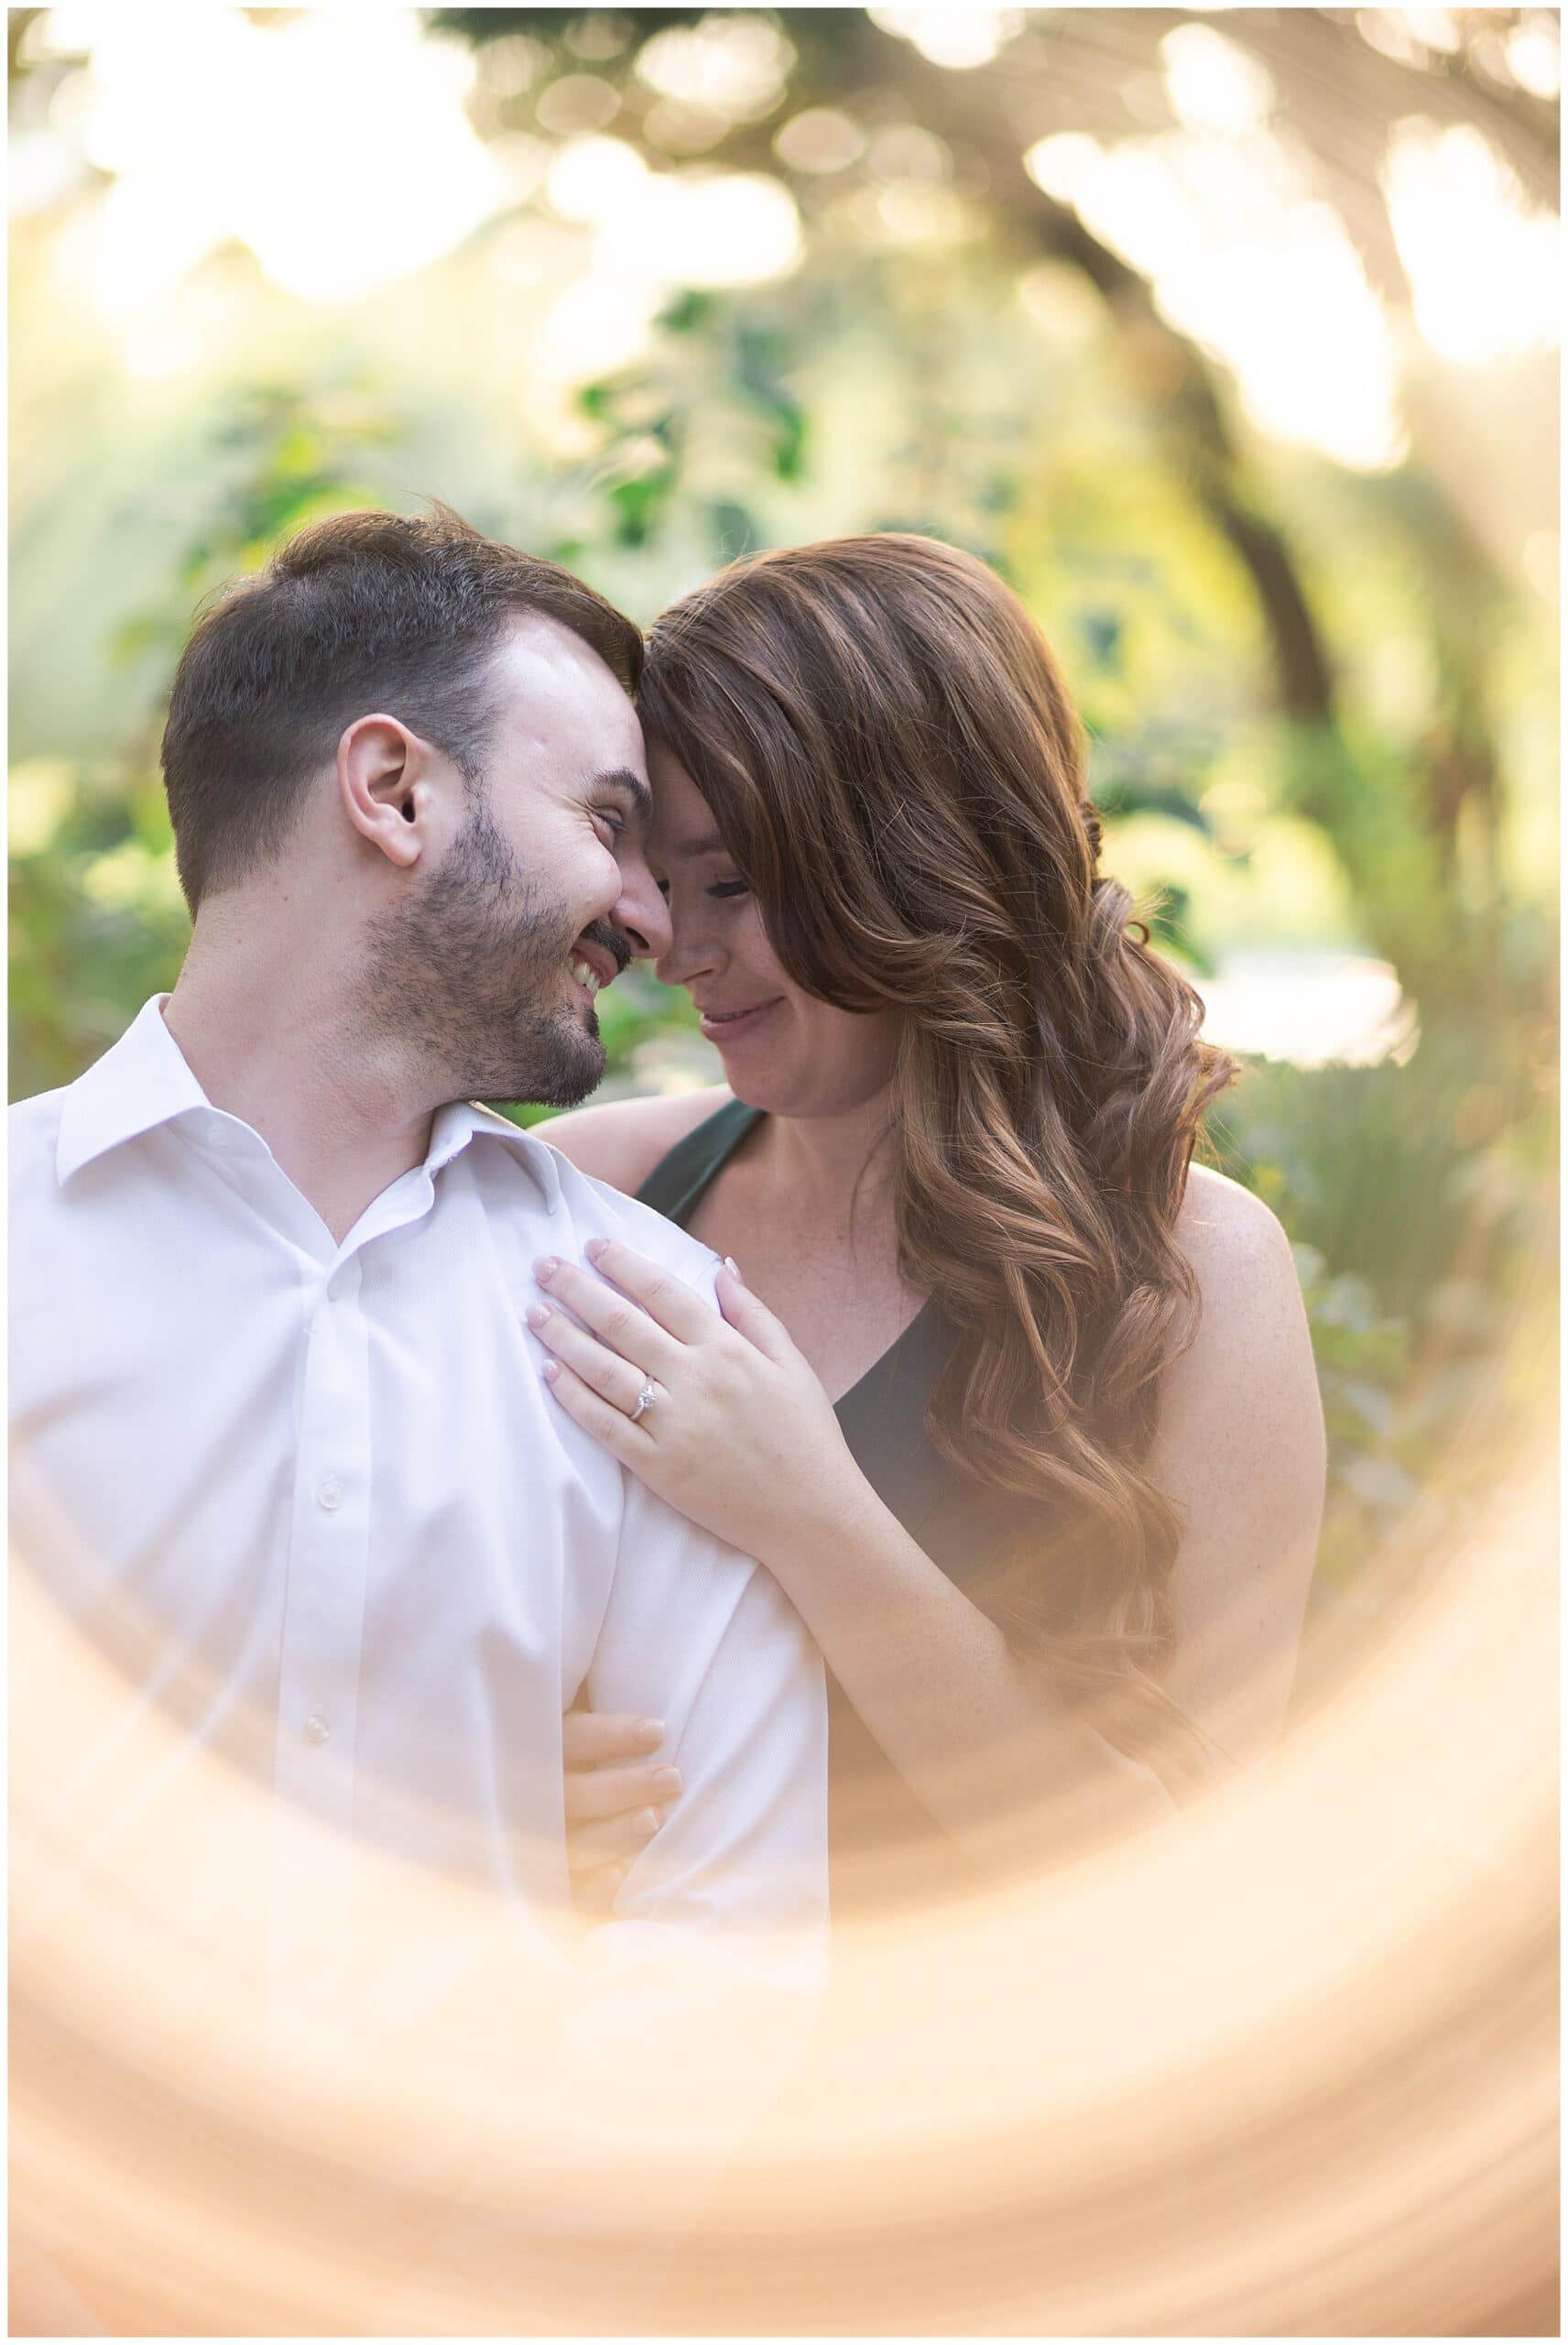 Houston engagement session at McGovern Centennial Gardens captured by Swish and Click Photography with a couple that's cuddling